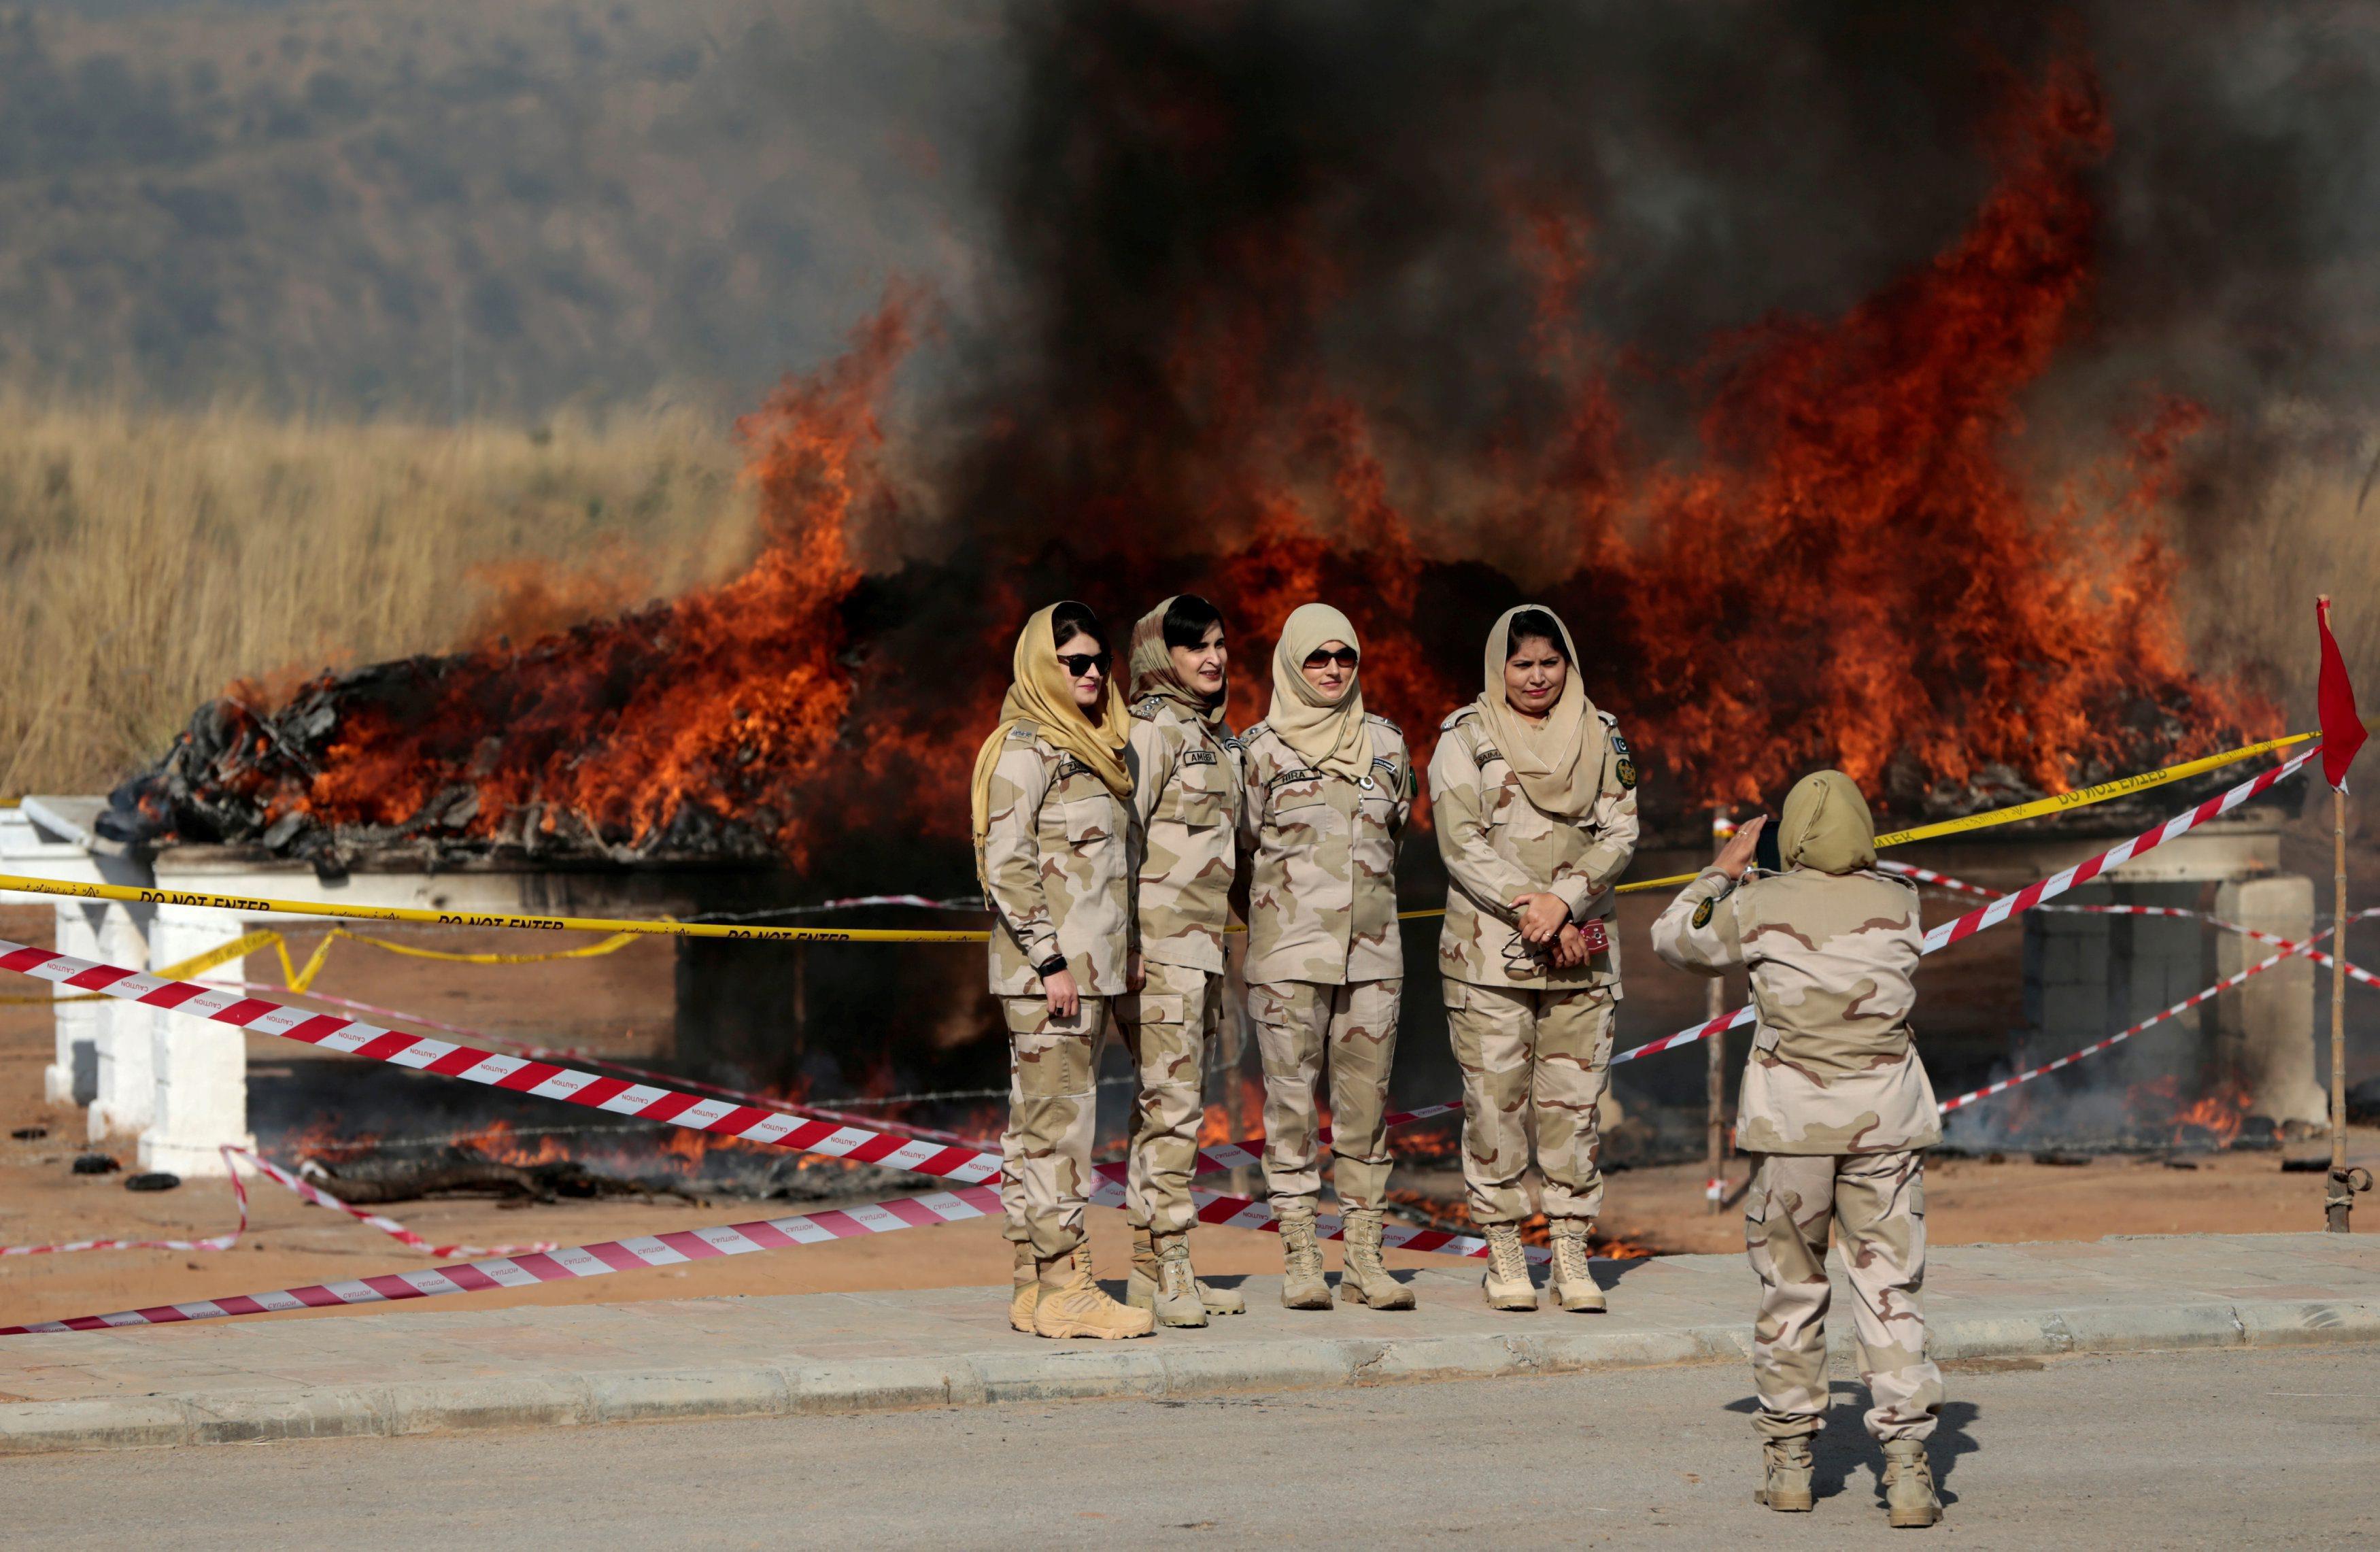 Members of the anti narcotics force pose for a picture as drugs are burned during a ceremony in Isla